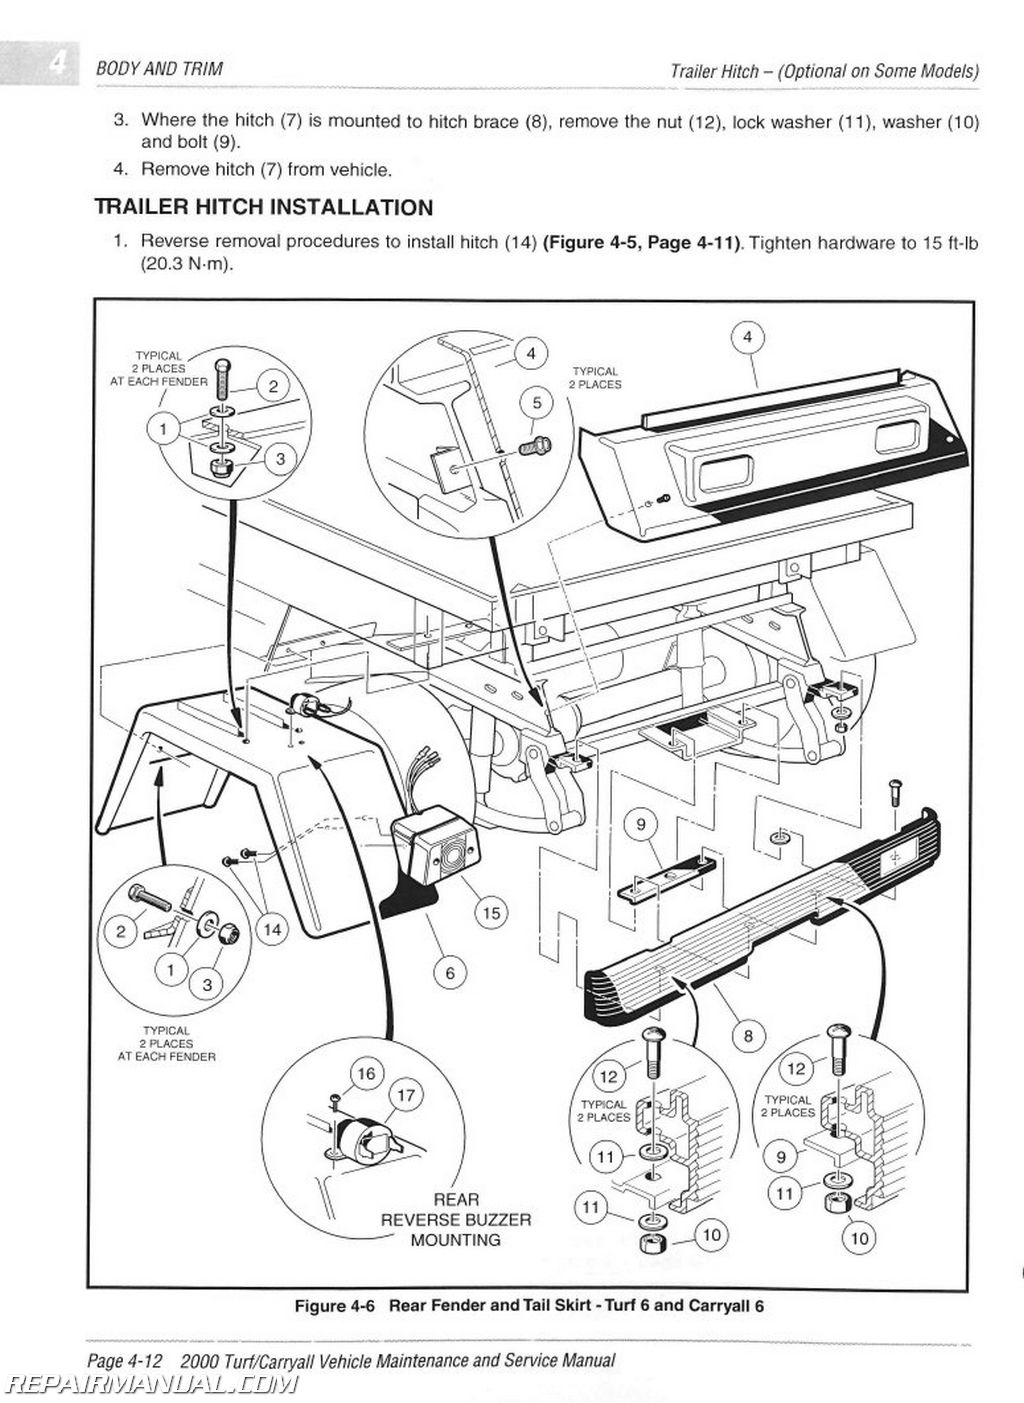 2000 Club Car Headlight Instructions | Release Date, Price ...